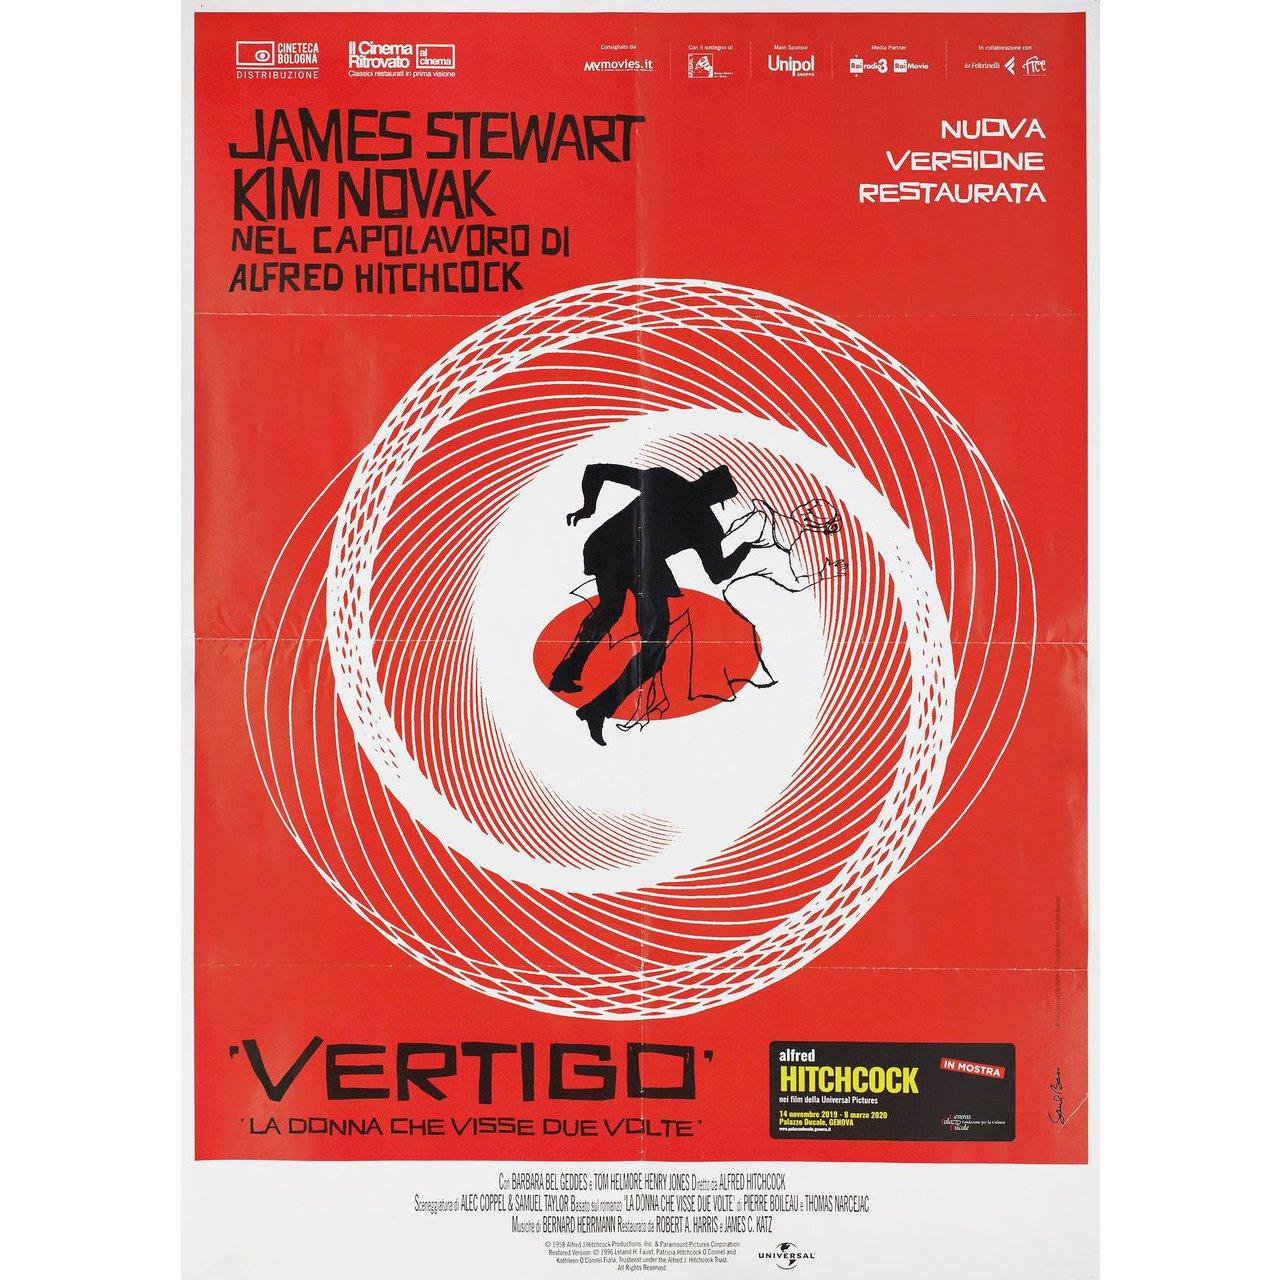 Original 2019 re-release Italian due fogli poster by Saul Bass for the 1958 film Vertigo directed by Alfred Hitchcock with James Stewart / Kim Novak / Barbara Bel Geddes / Tom Helmore. Very good-fine condition, folded with small tear. Many original